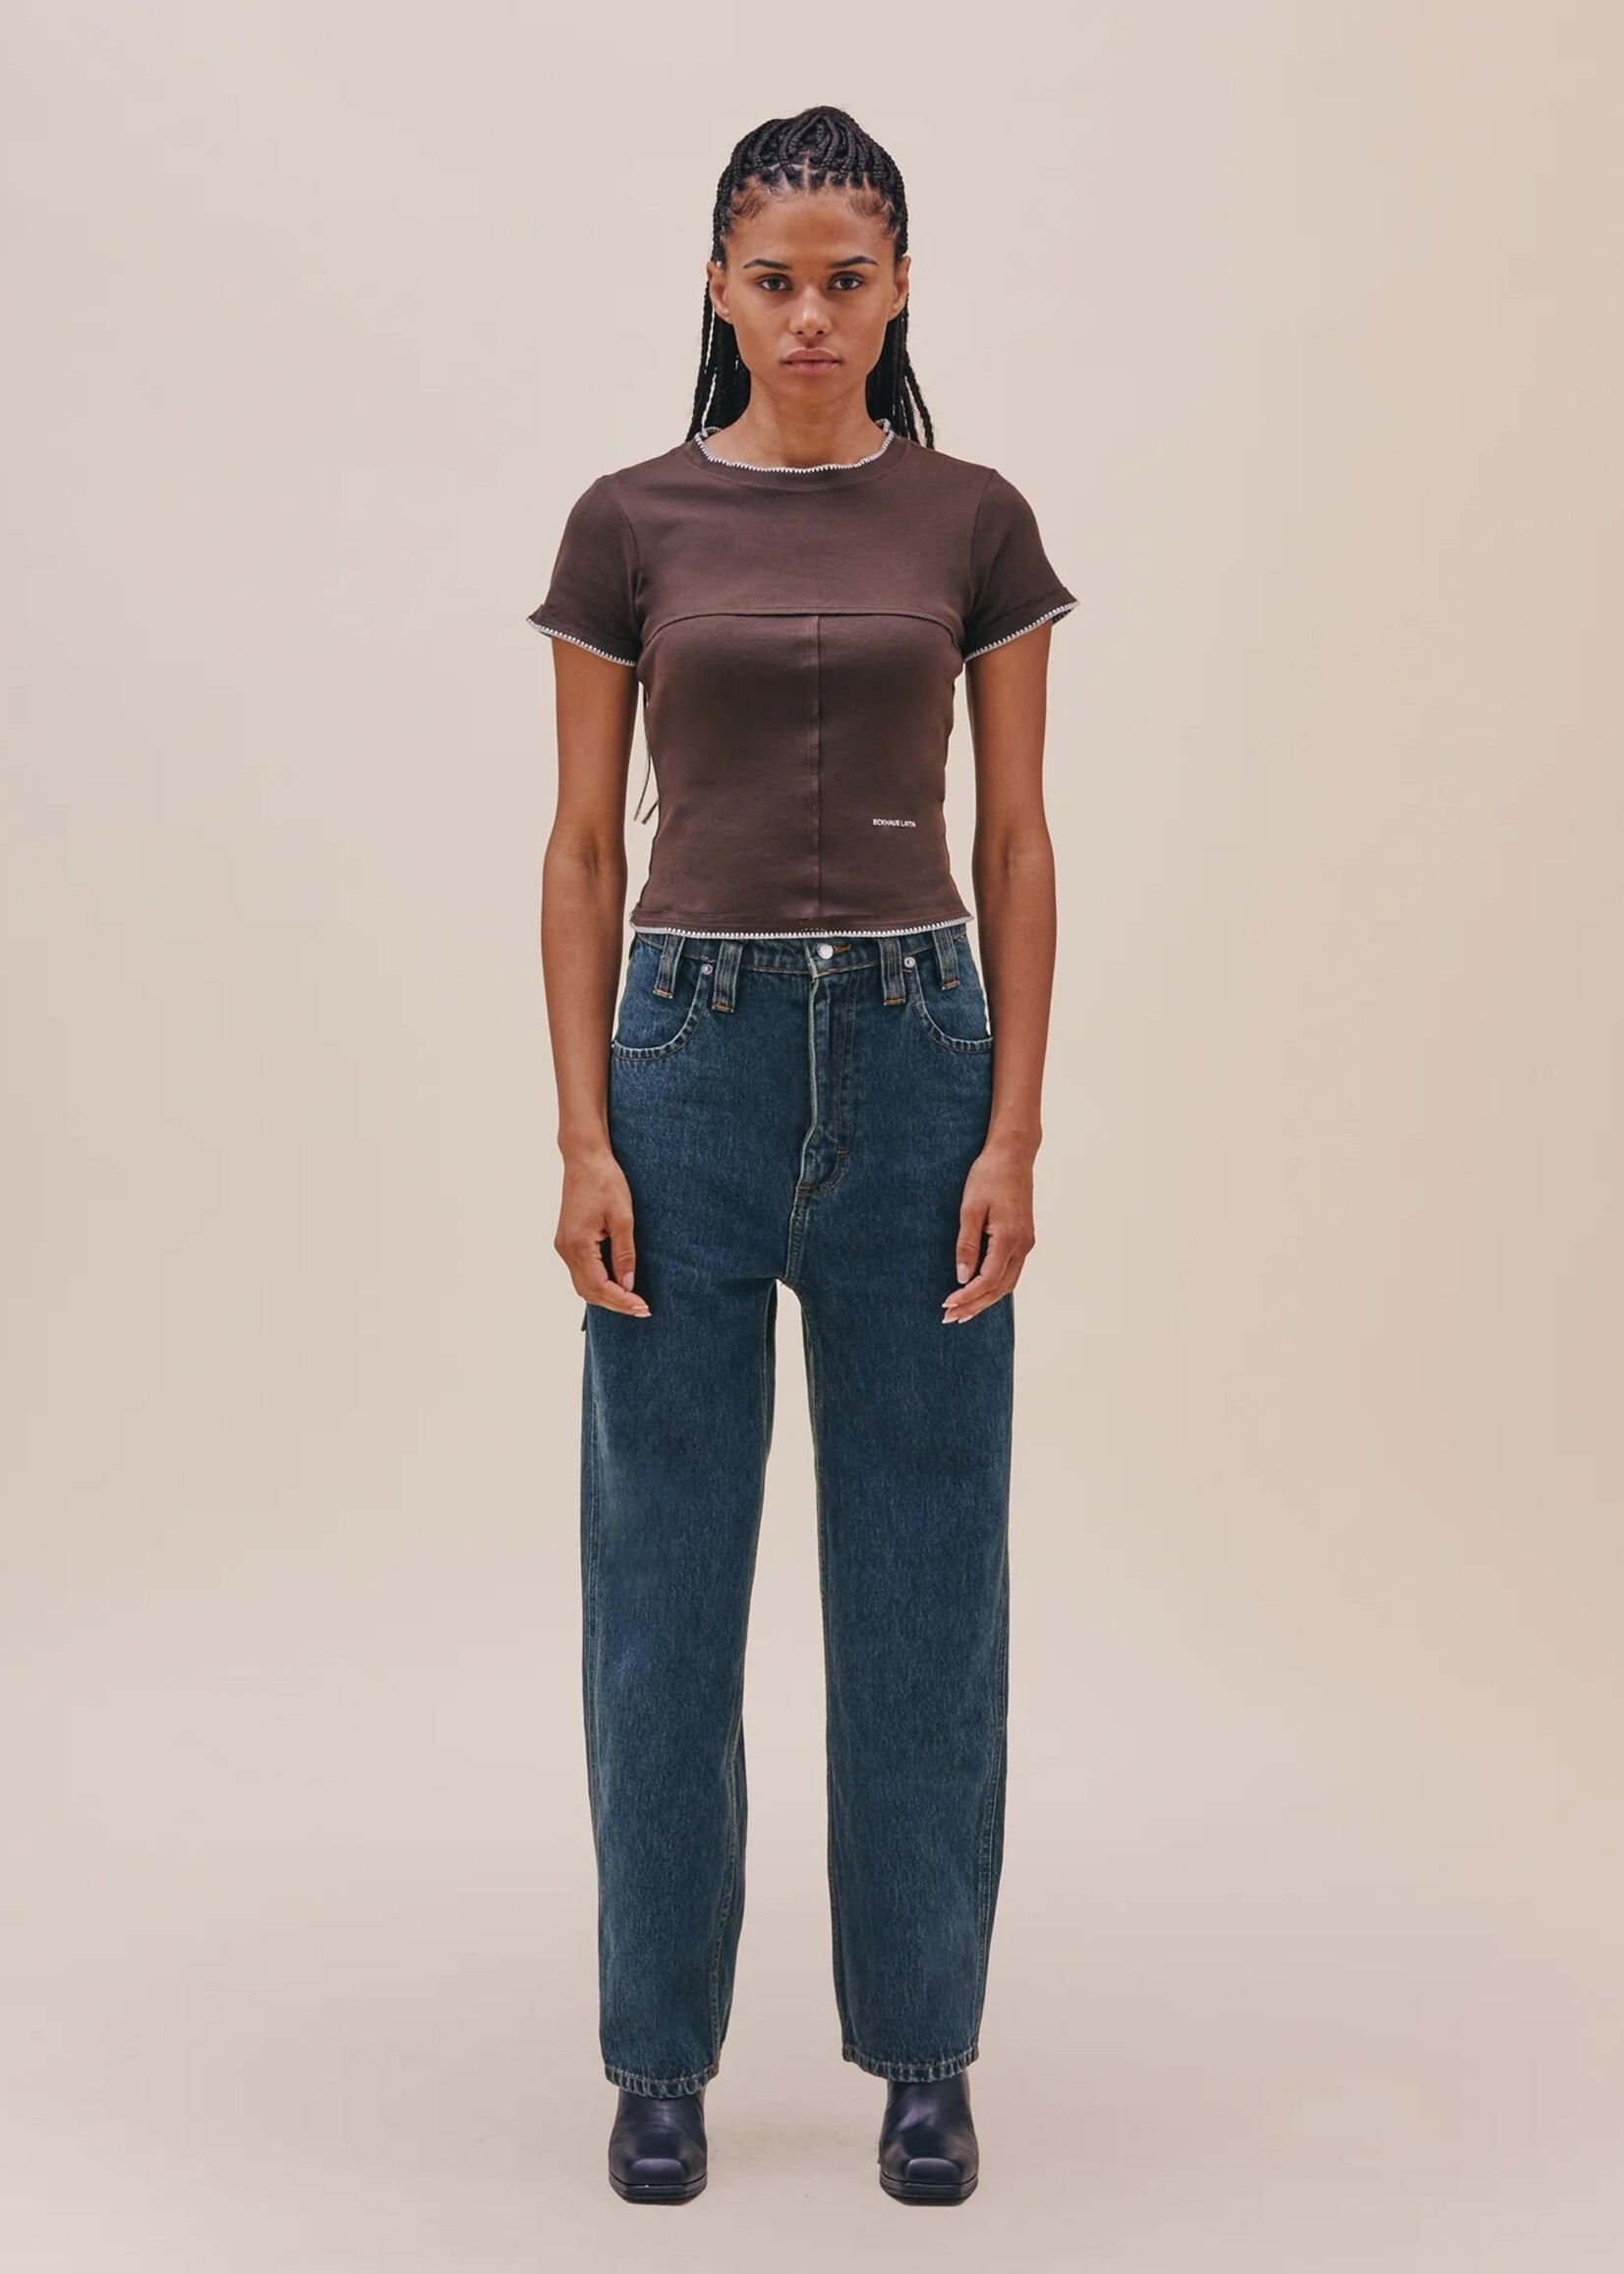 ECKHAUS LATTA The Baggy Jean in New Blue